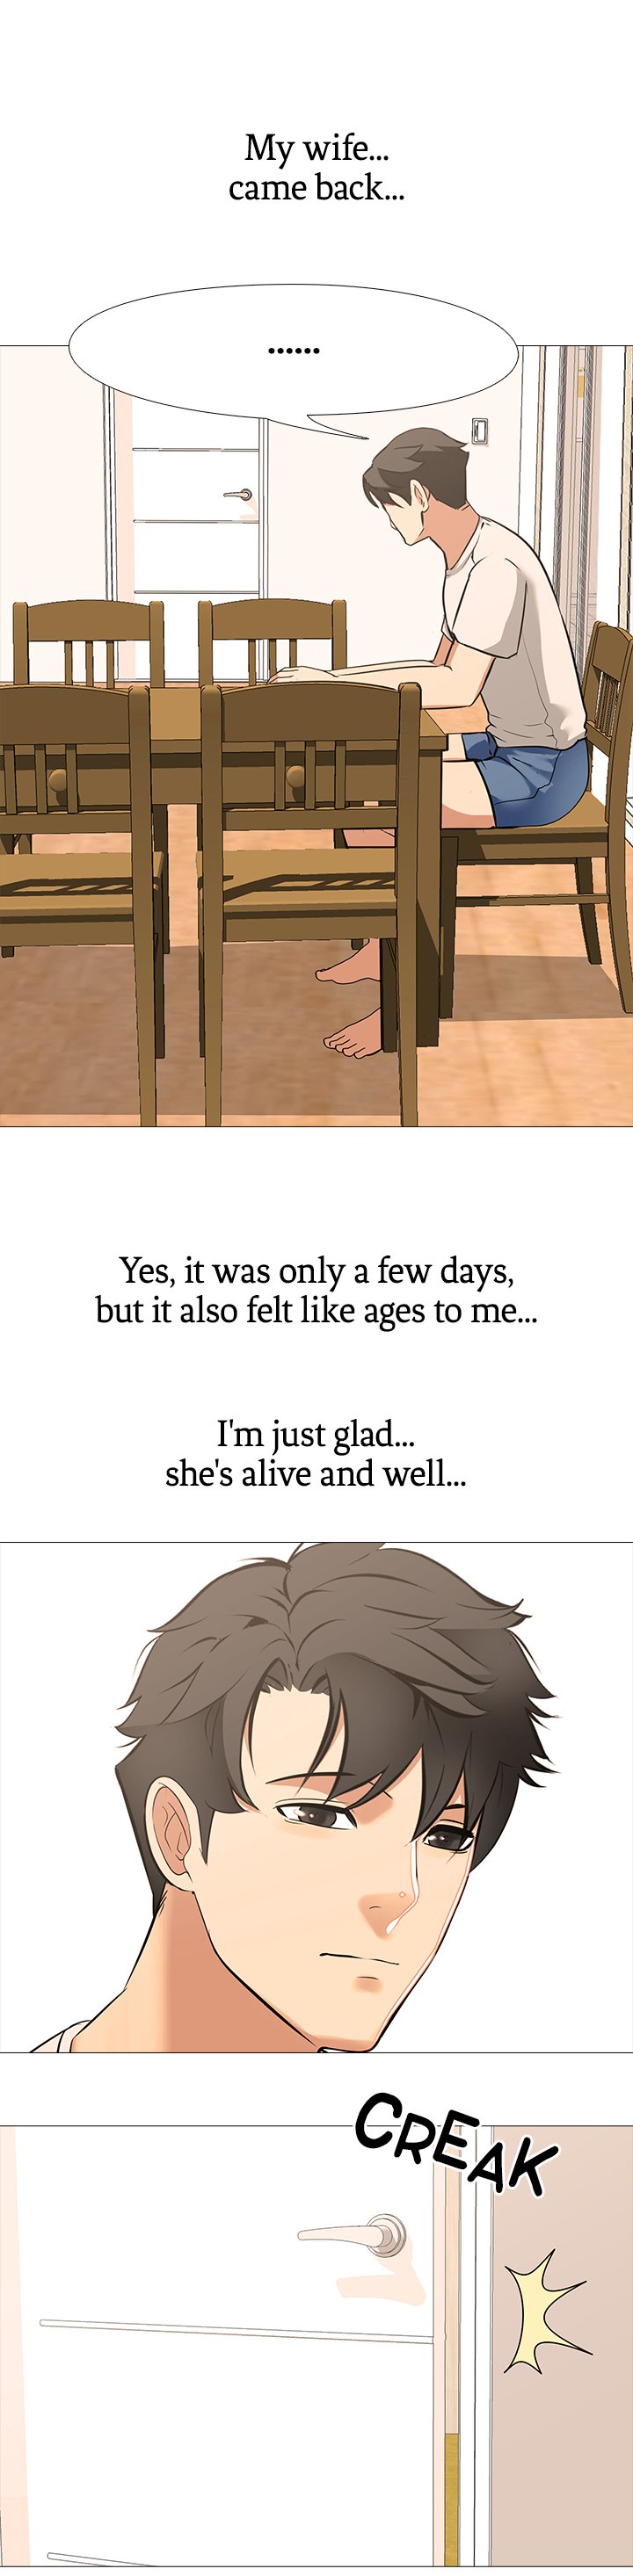 WIFE GAME - Chapter 19 Page 3